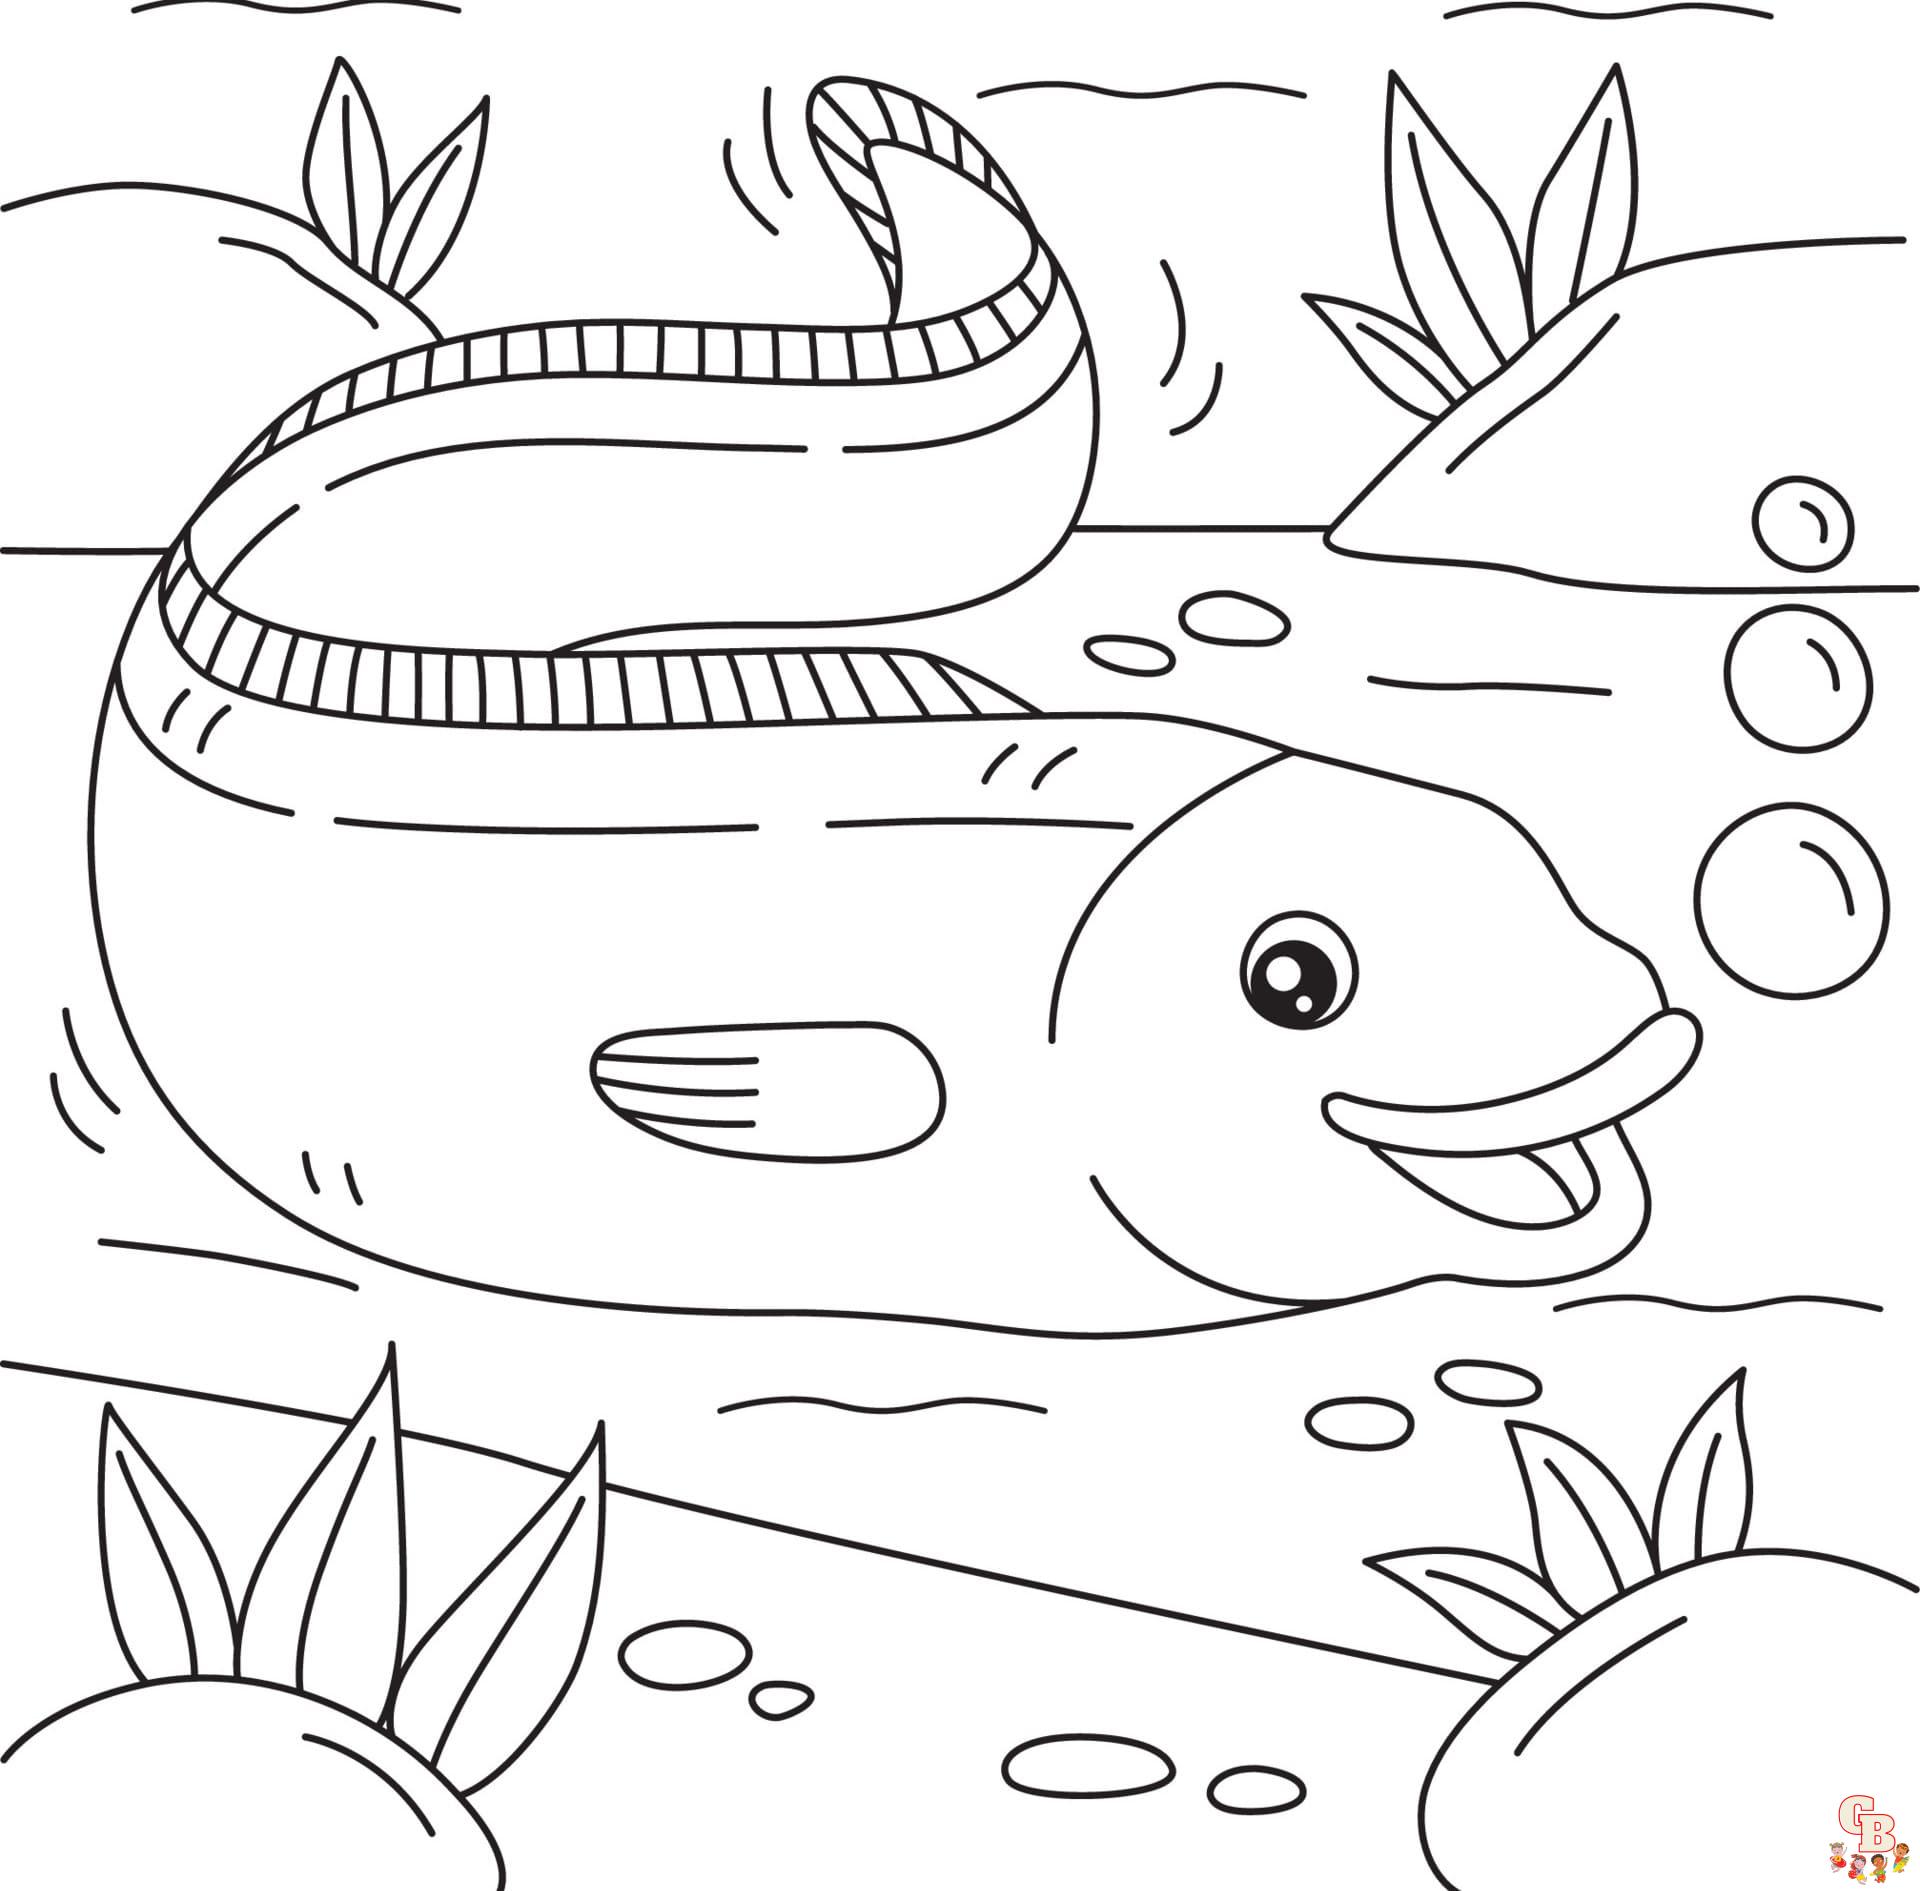 Free Eel coloring pages for kids